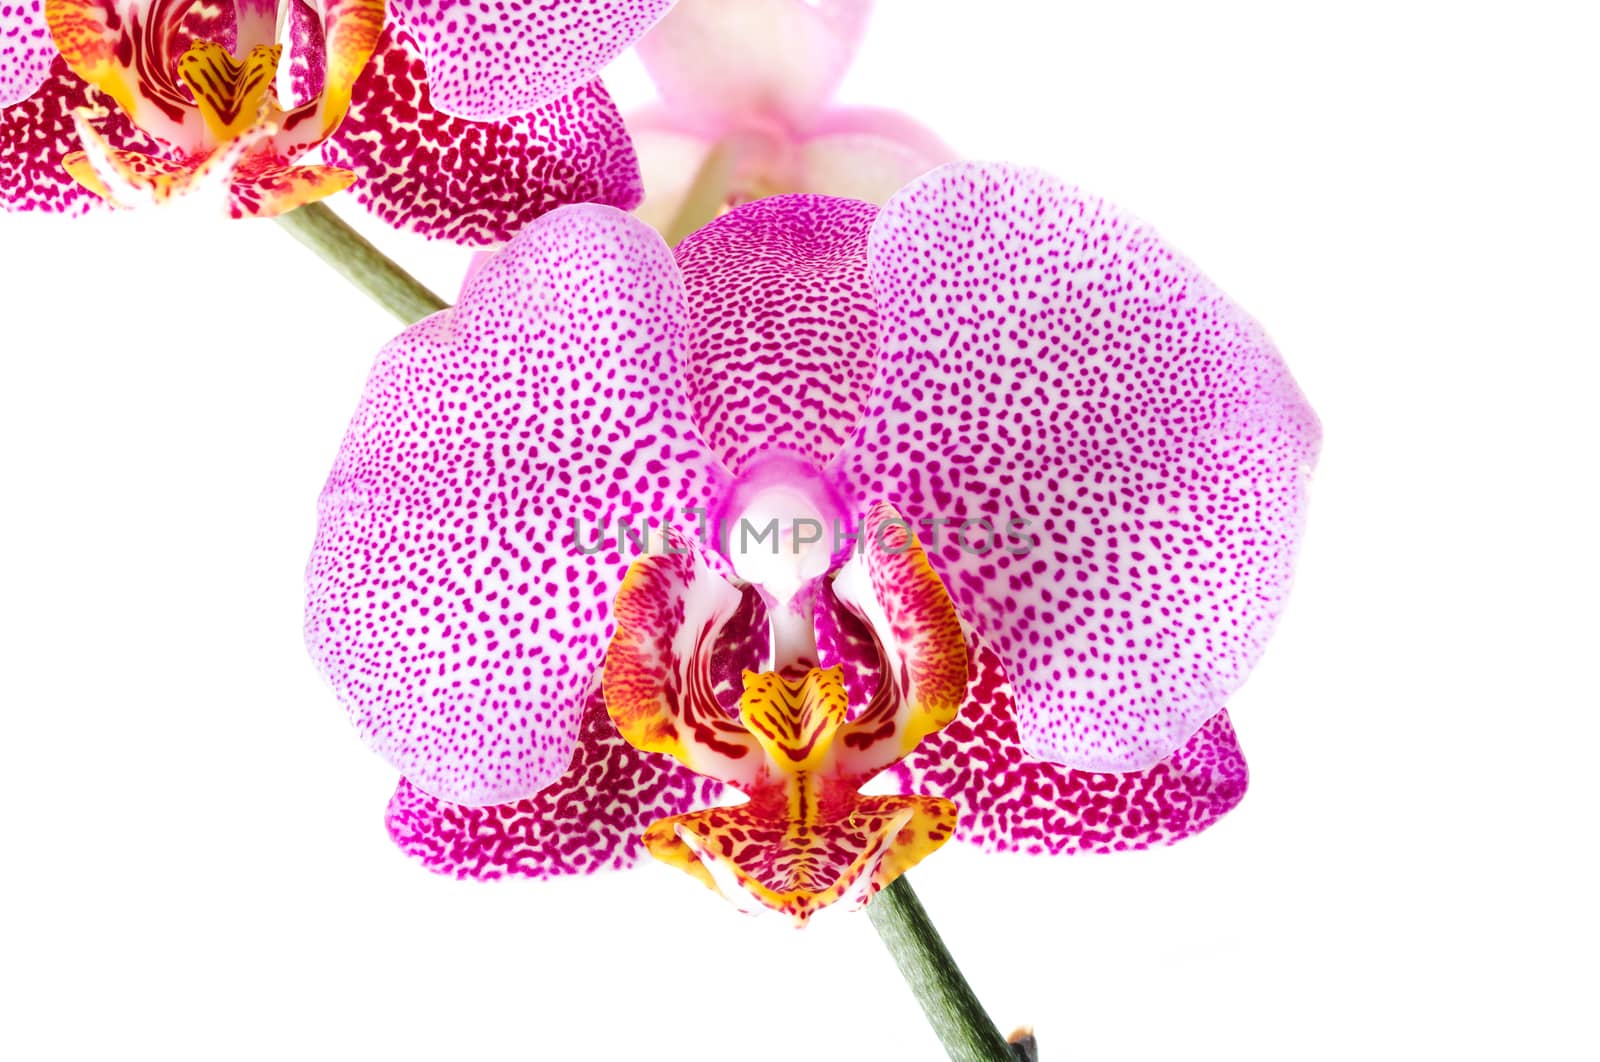 photographed close-up flower red Orchid